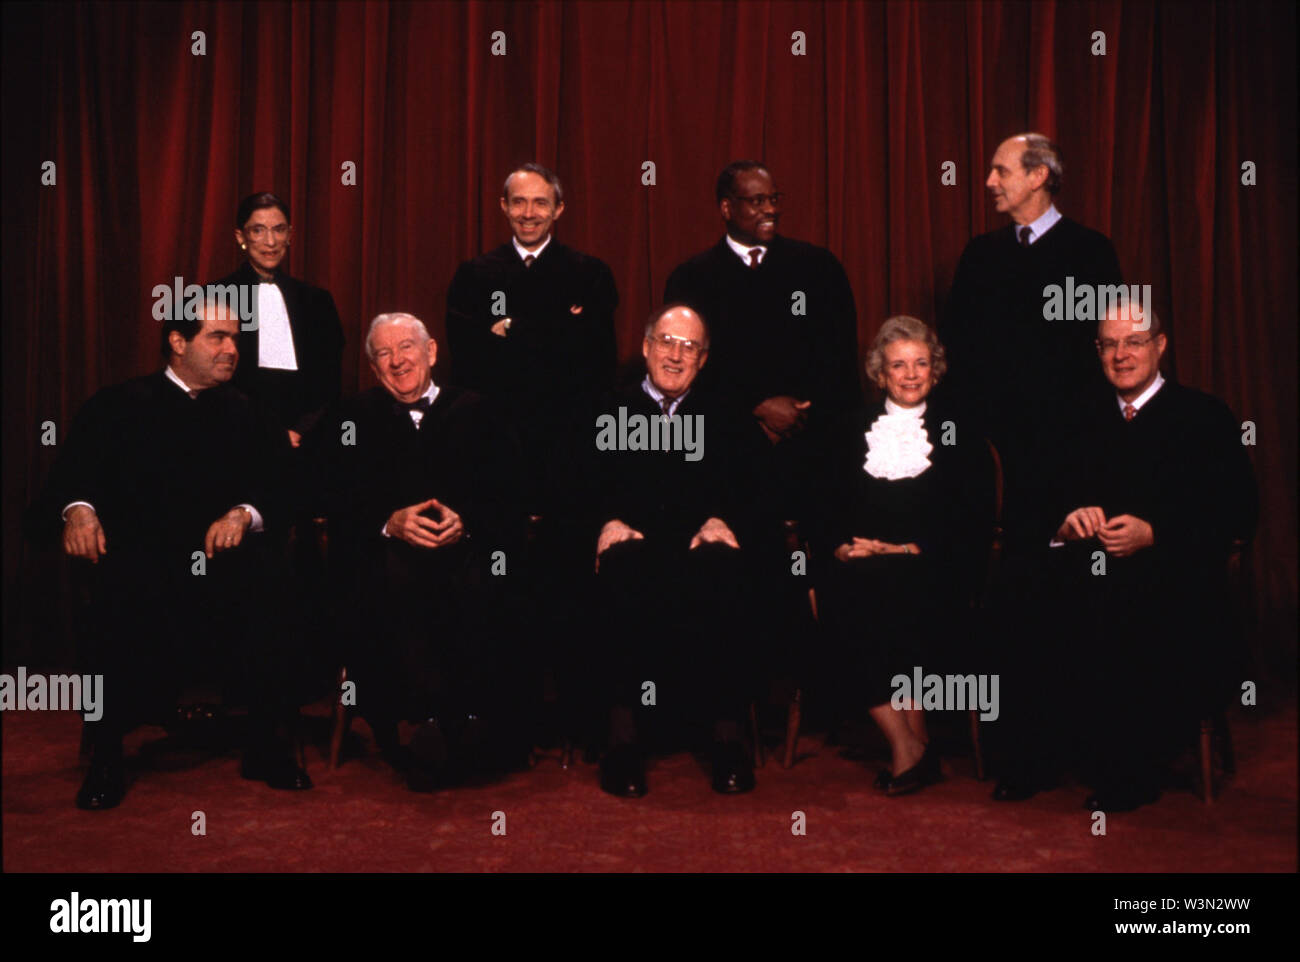 Washington, DC - File photo from November 10, 1994 -- Latest group photo of the Justices of the United States Supreme Court. (L-R) Associate Justice Antonin Scalia; Associate Justice Ruth Bader Ginsburg; Associate Justice John Paul Stevens; Associate Justice David Hackett Souter; Chief Justice William H. Rehnquist; Associate Justice Clarence Thomas; Associate Justice Sandra Day O'Connor; Associate Justice Stephen G. Breyer; Associate Justice Anthony M. Kennedy.Credit: Corbis Sygma | usage worldwide Stock Photo